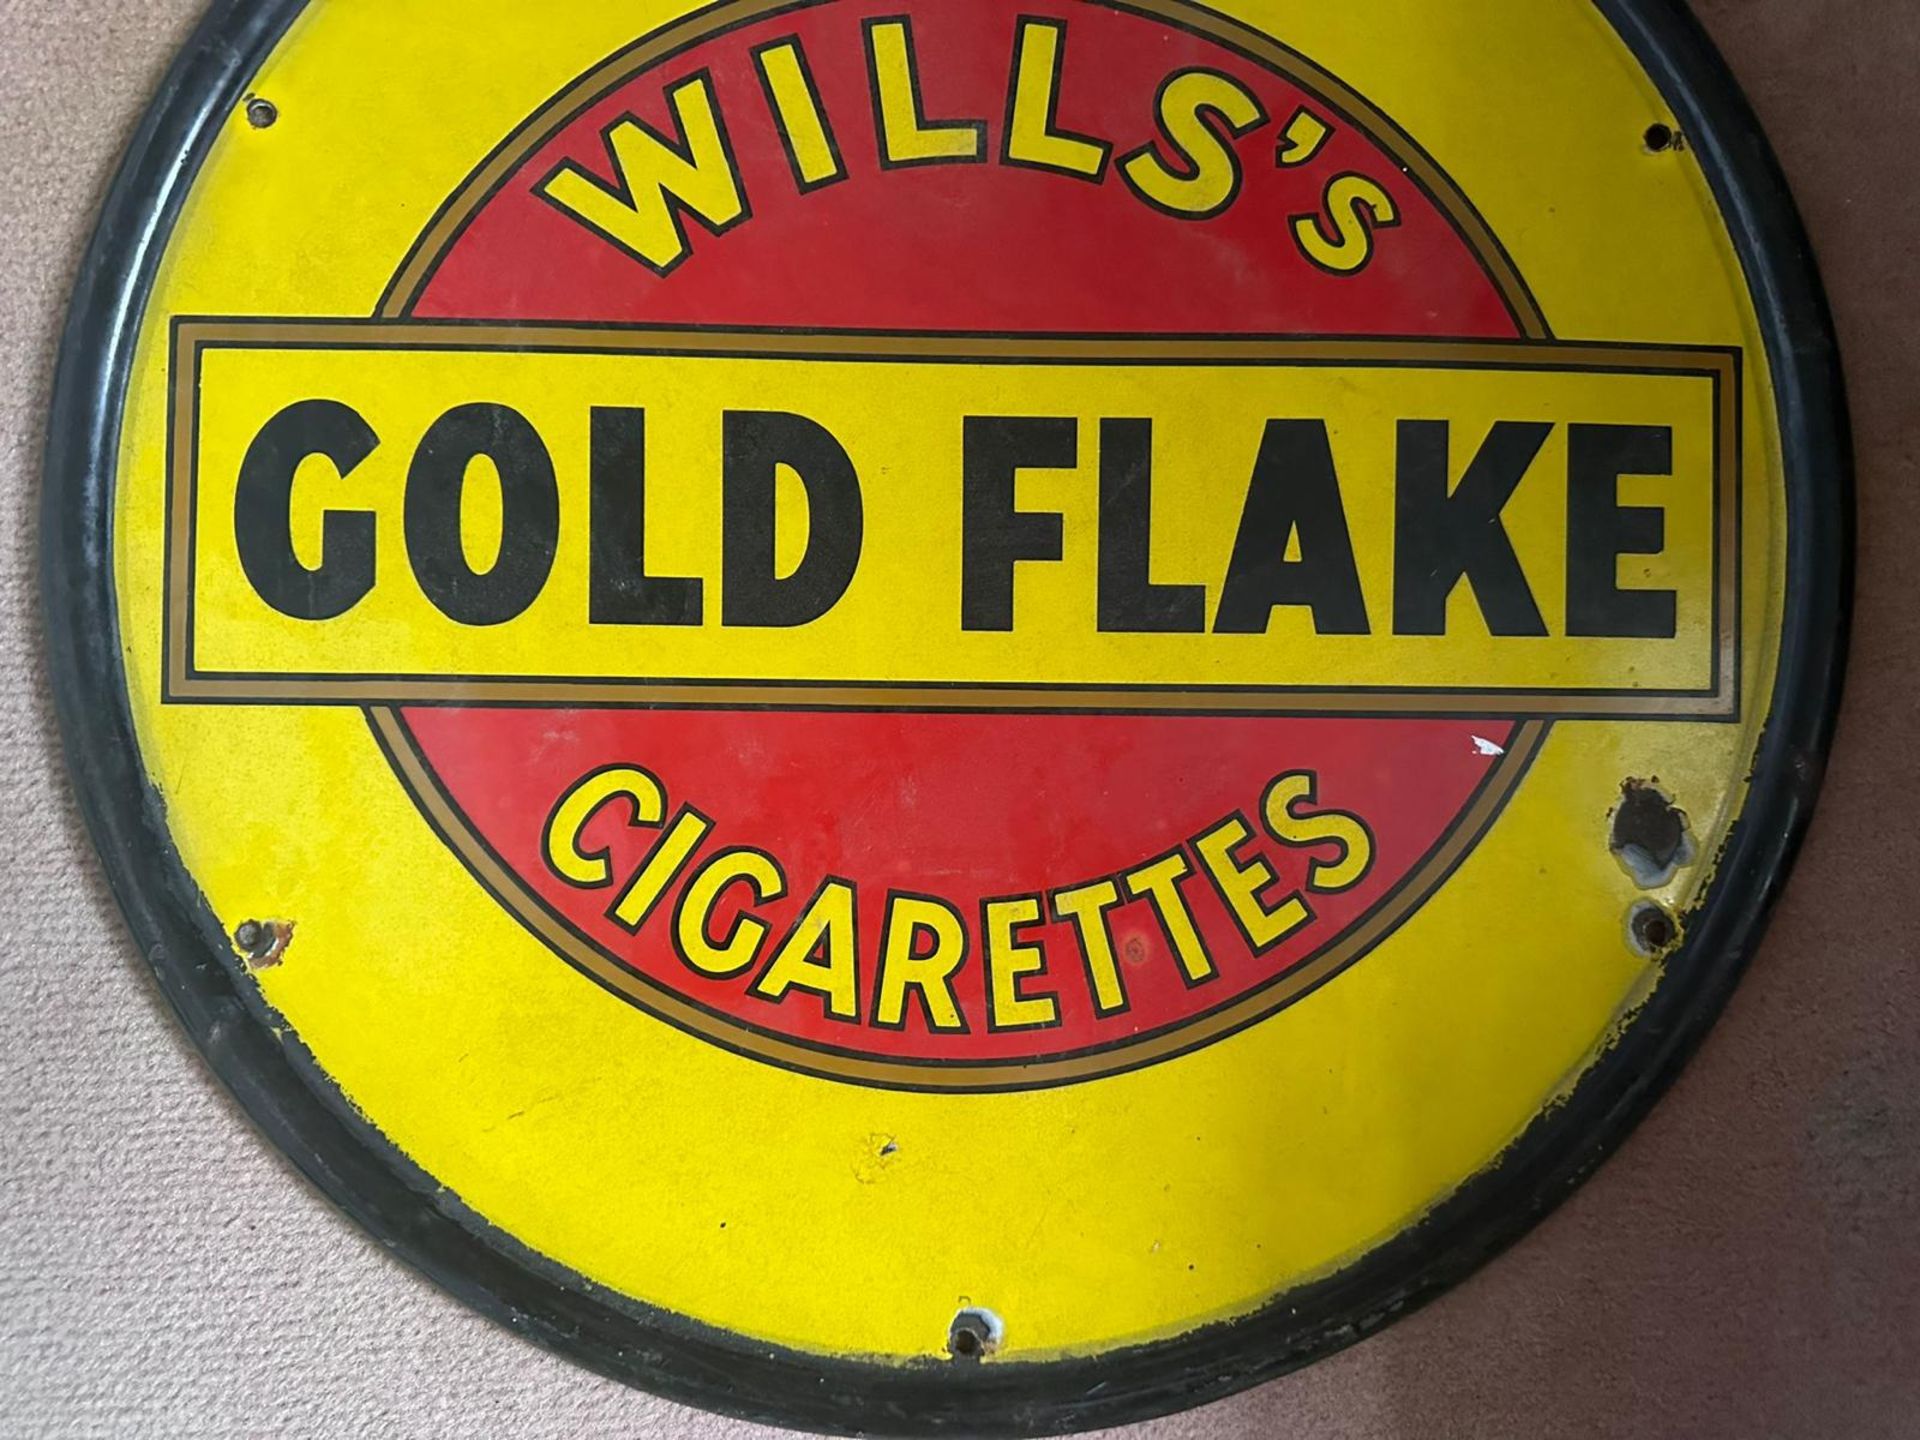 A vintage enamelled circular roundel advertising sign for Will's Gold Flake Cigarettes, - Image 7 of 9